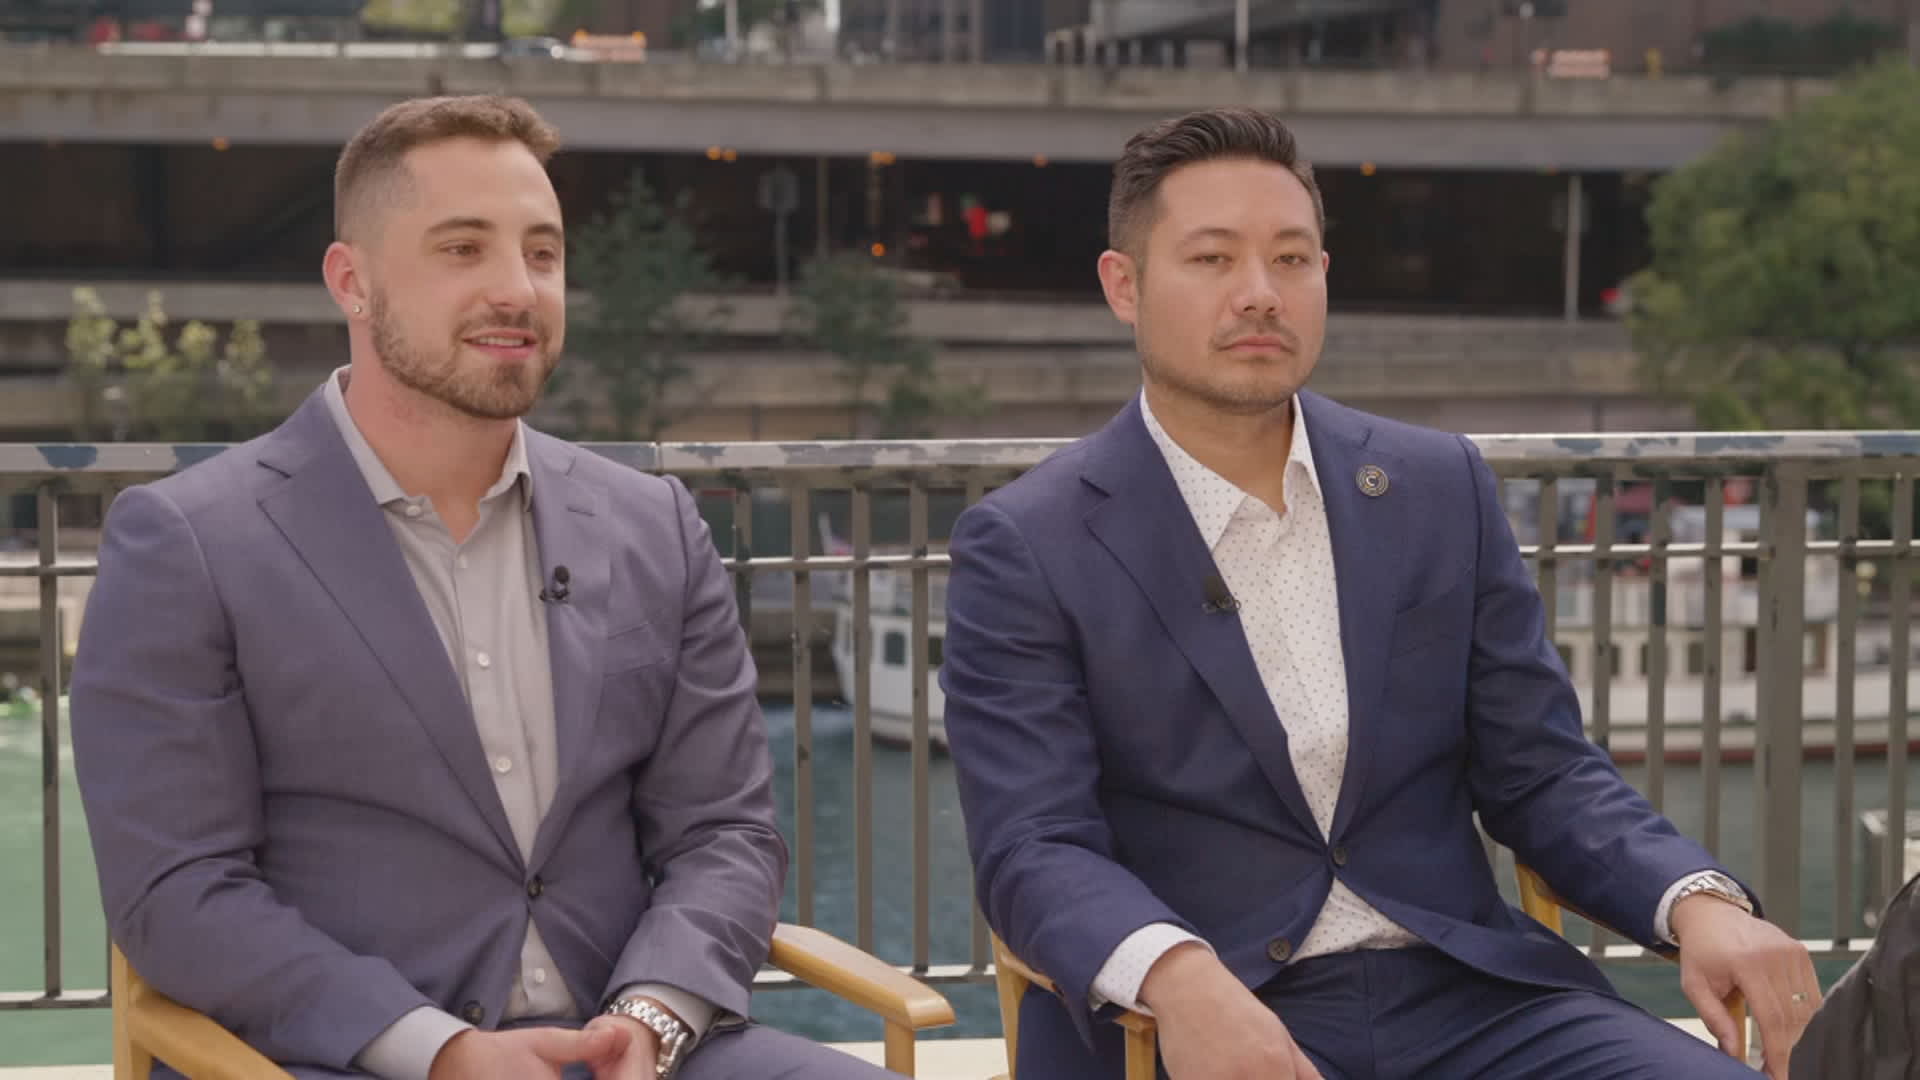 Ben Weiss, CEO of Coinflip, and Kris Dayrit, president of Coinflip, say their company allows anyone to purchase up to $900 in Bitcoin with just a name and phone number.